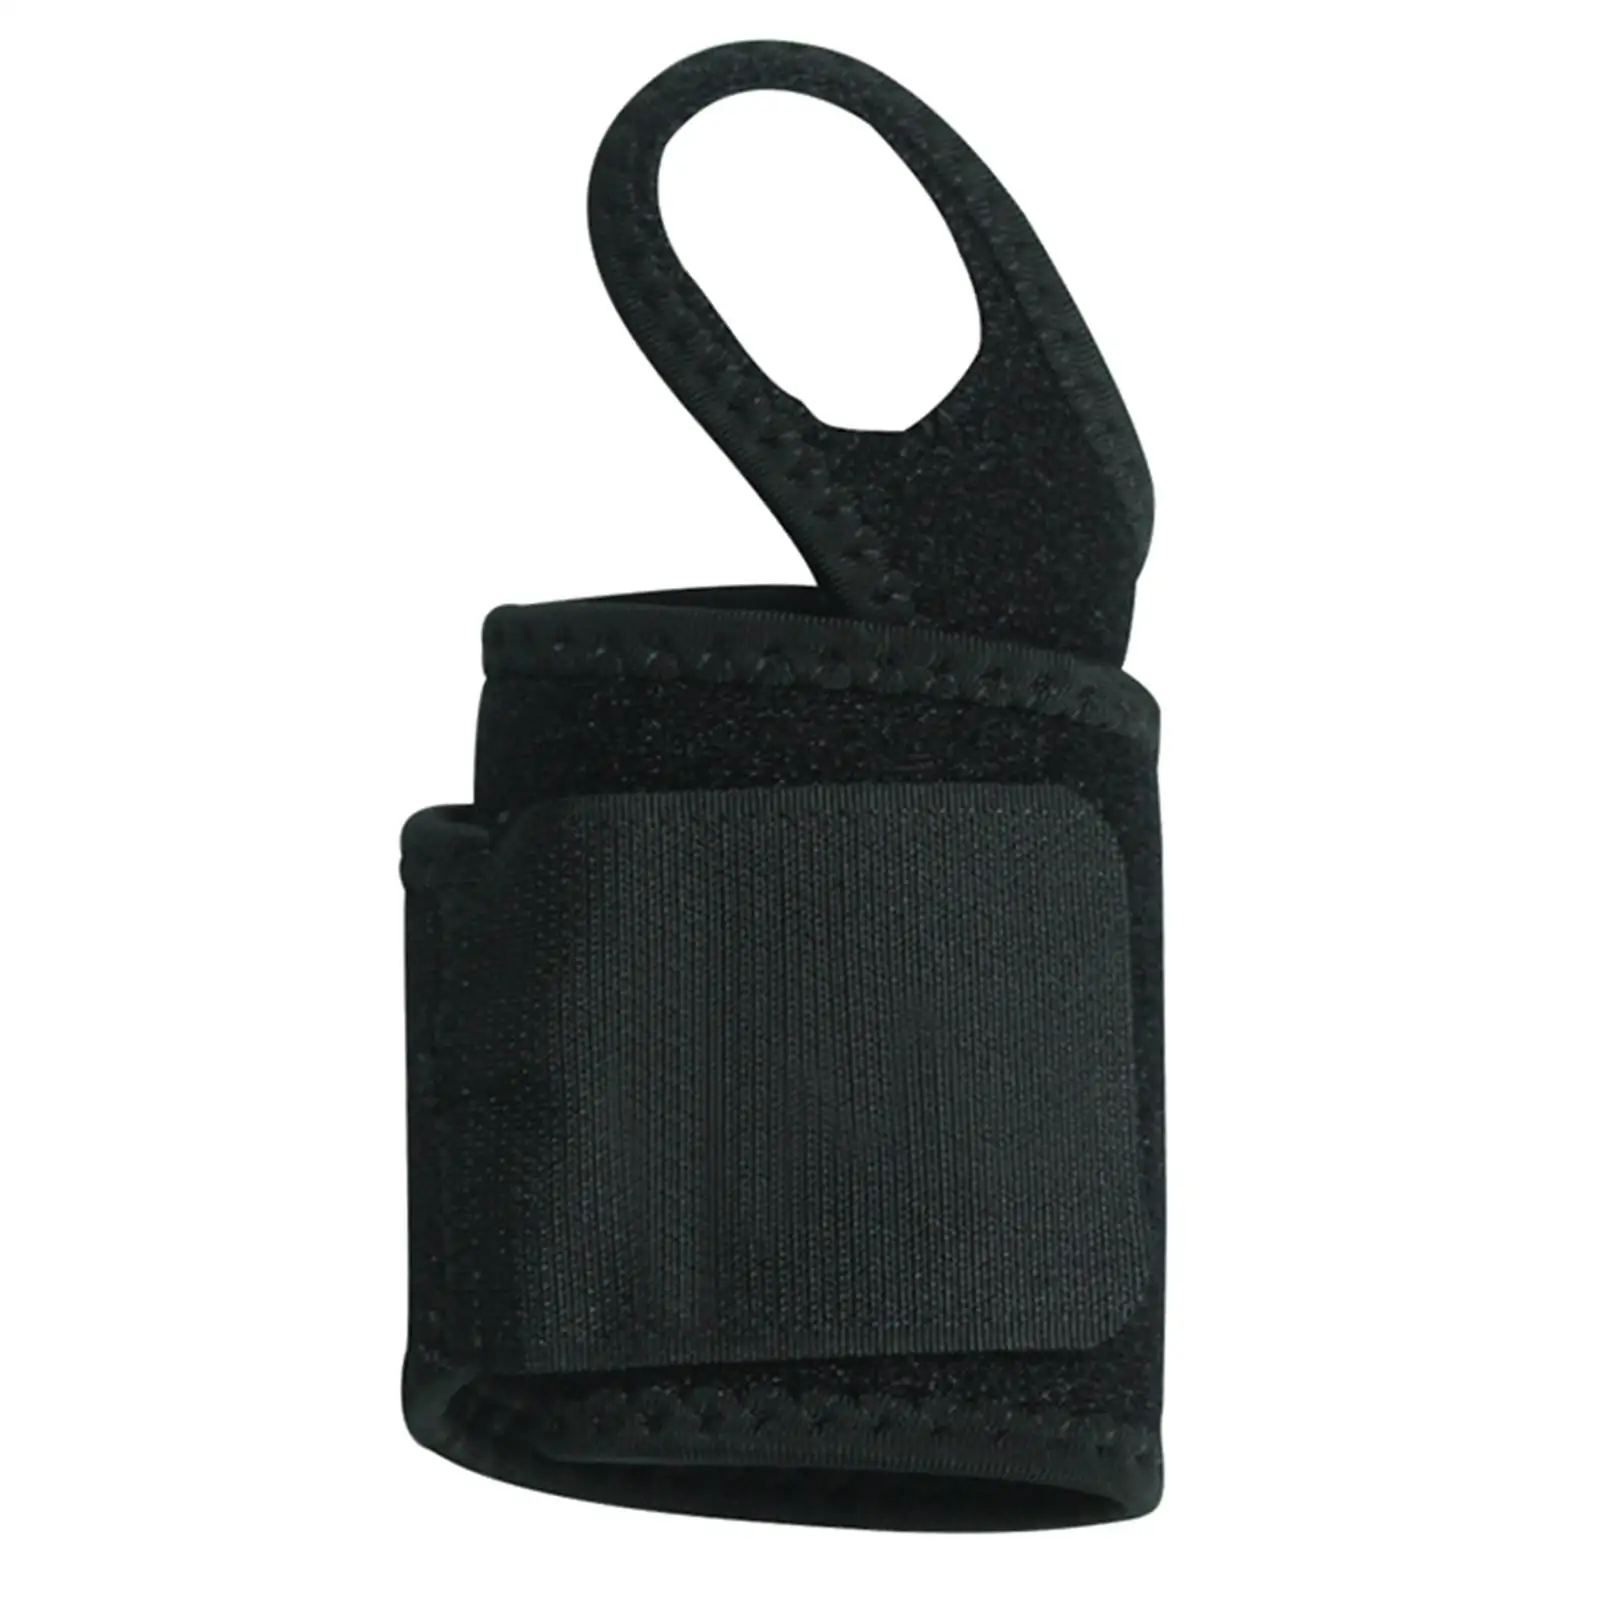 Wrist Support Strap with Thumb Loop Strap for Exercise Weight Lifting Fitness